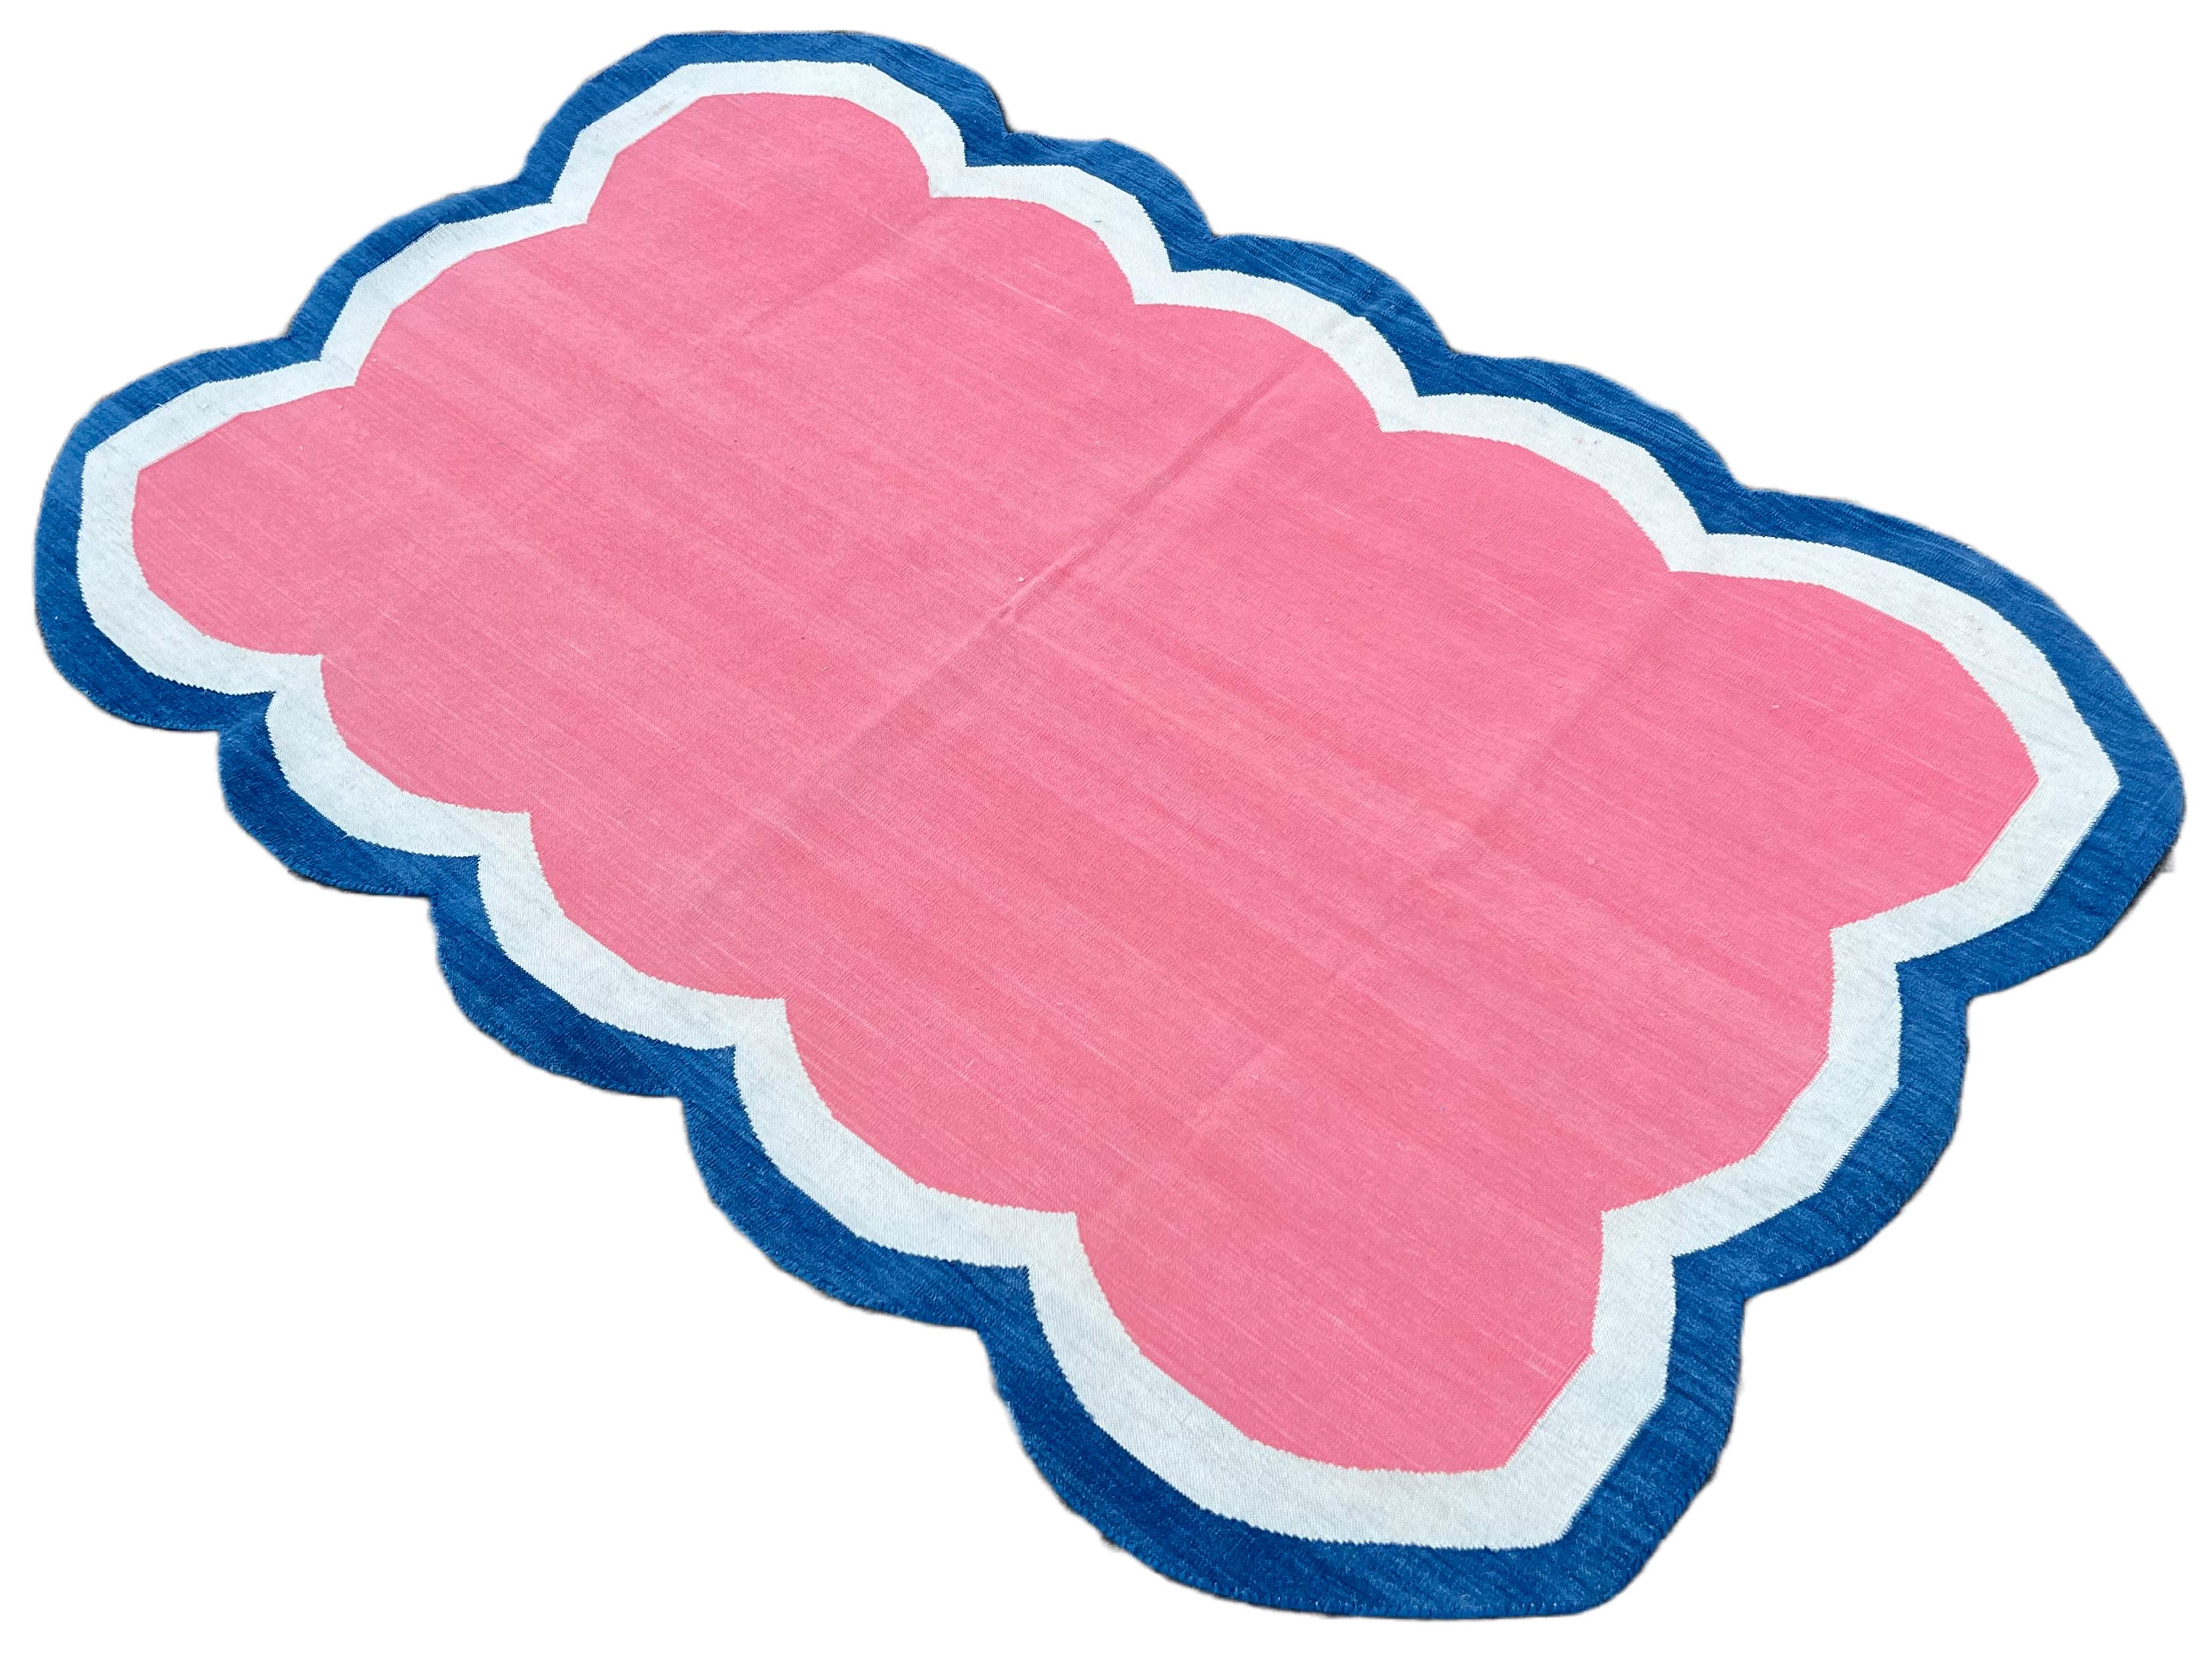 Cotton Vegetable Dyed Pink, Cream And Indigo Blue Four Sided Scalloped Rug-3'x5' 
(Scallops runs on all Four Sides)
These special flat-weave dhurries are hand-woven with 15 ply 100% cotton yarn. Due to the special manufacturing techniques used to